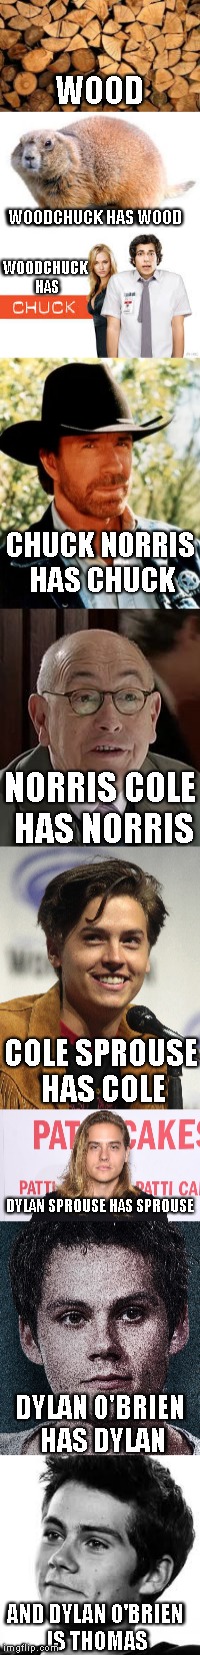 Possibly the longest relativity between Thomas from Maze Runner and some wood | WOOD; WOODCHUCK HAS WOOD; WOODCHUCK HAS; CHUCK NORRIS HAS CHUCK; NORRIS COLE HAS NORRIS; COLE SPROUSE HAS COLE; DYLAN SPROUSE HAS SPROUSE; DYLAN O'BRIEN HAS DYLAN; AND DYLAN O'BRIEN IS THOMAS | image tagged in memes,long meme | made w/ Imgflip meme maker